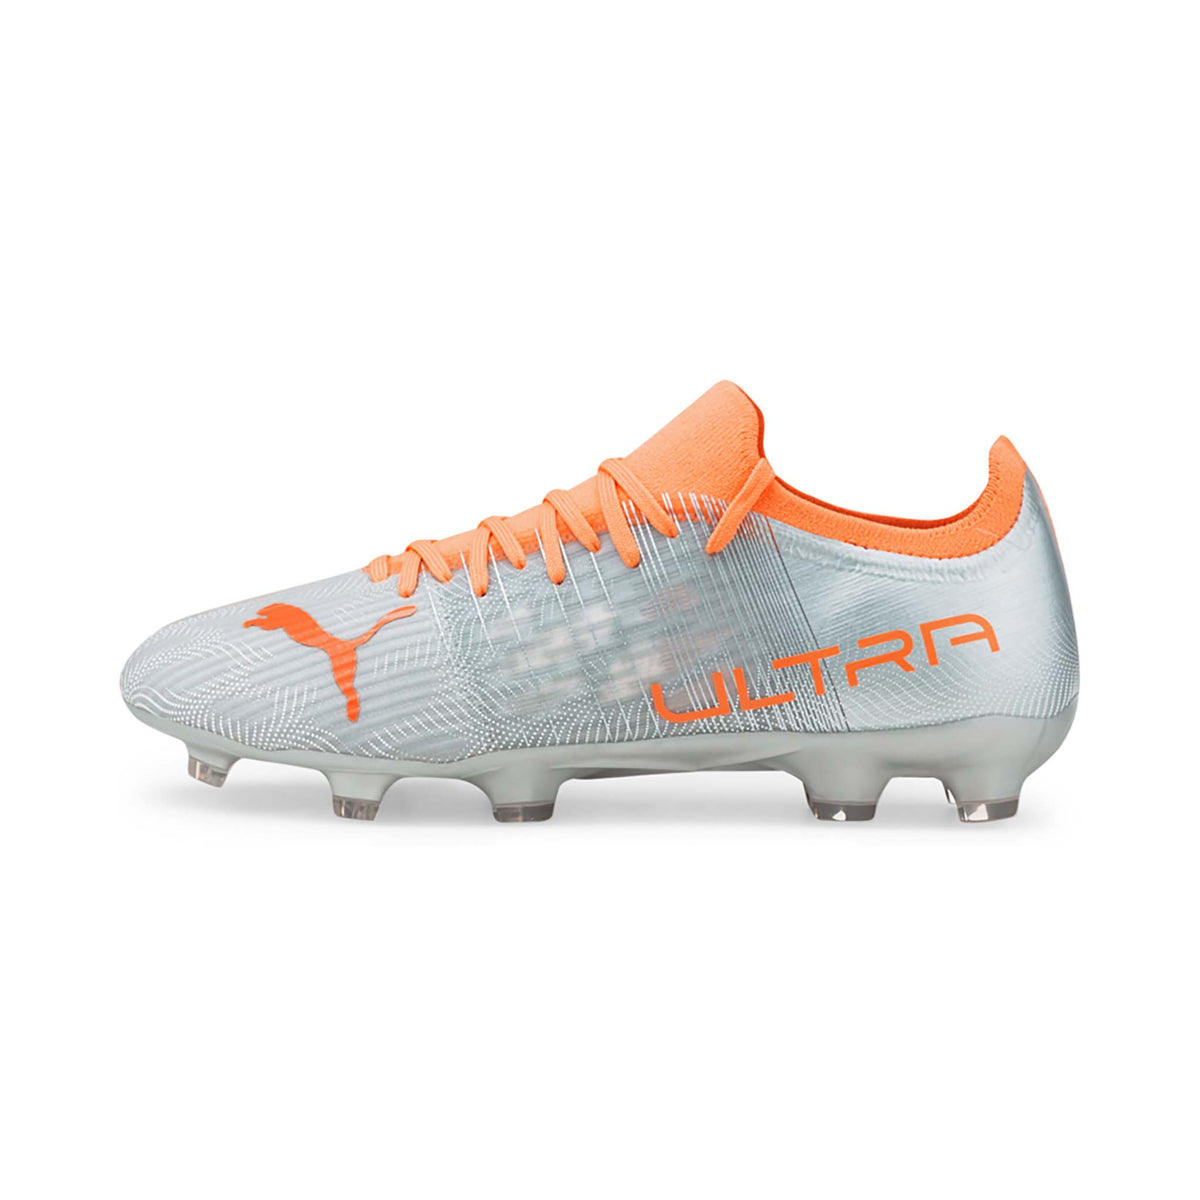 Puma Ultra 3.4 FG/AG soccer shoes for adults |Soccer Sport Fitness